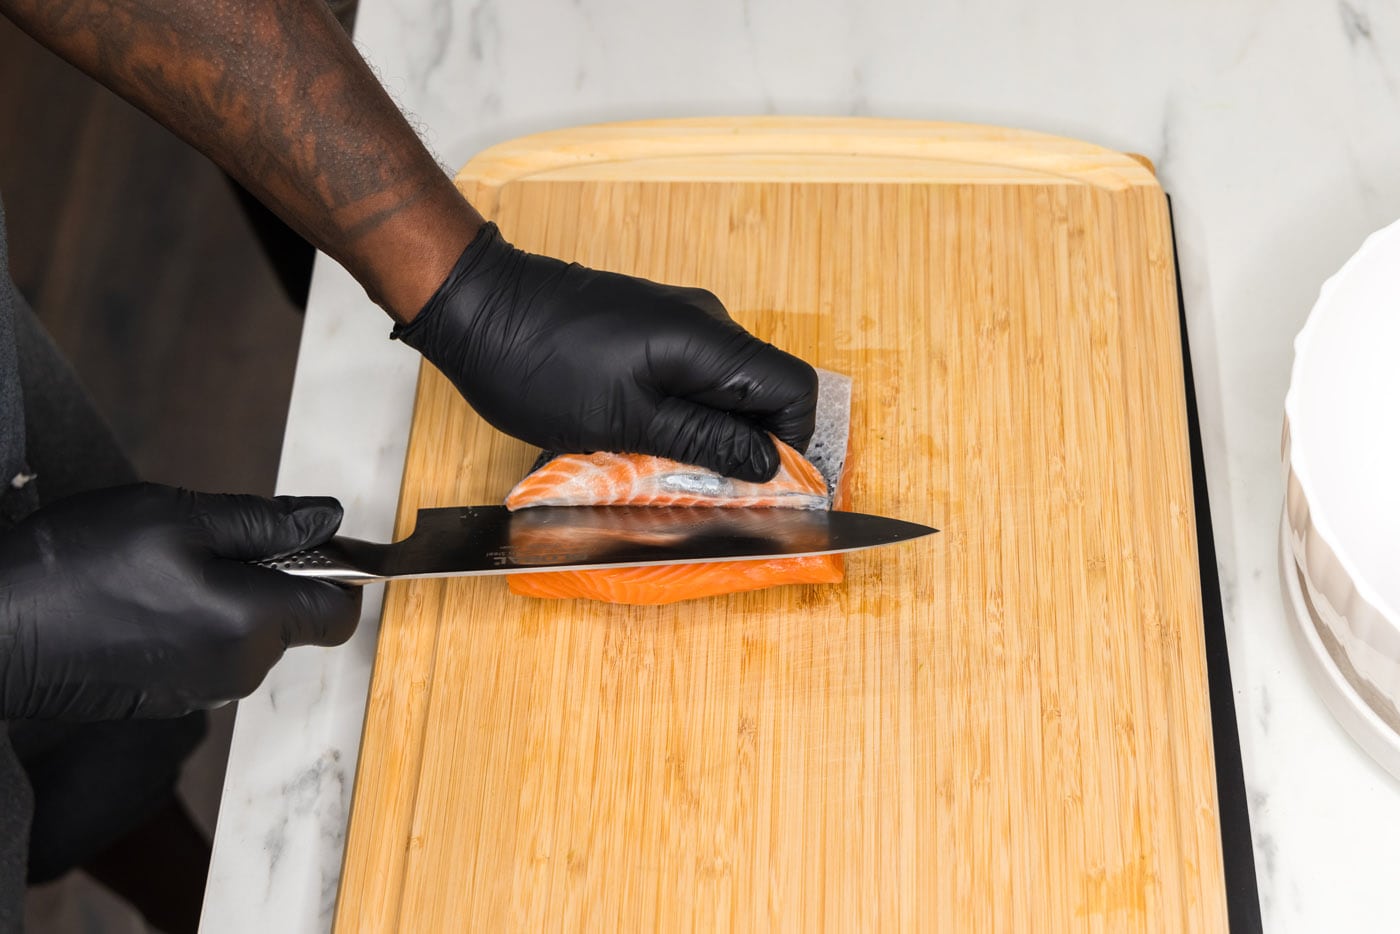 Removing skin from salmon filet with a knife